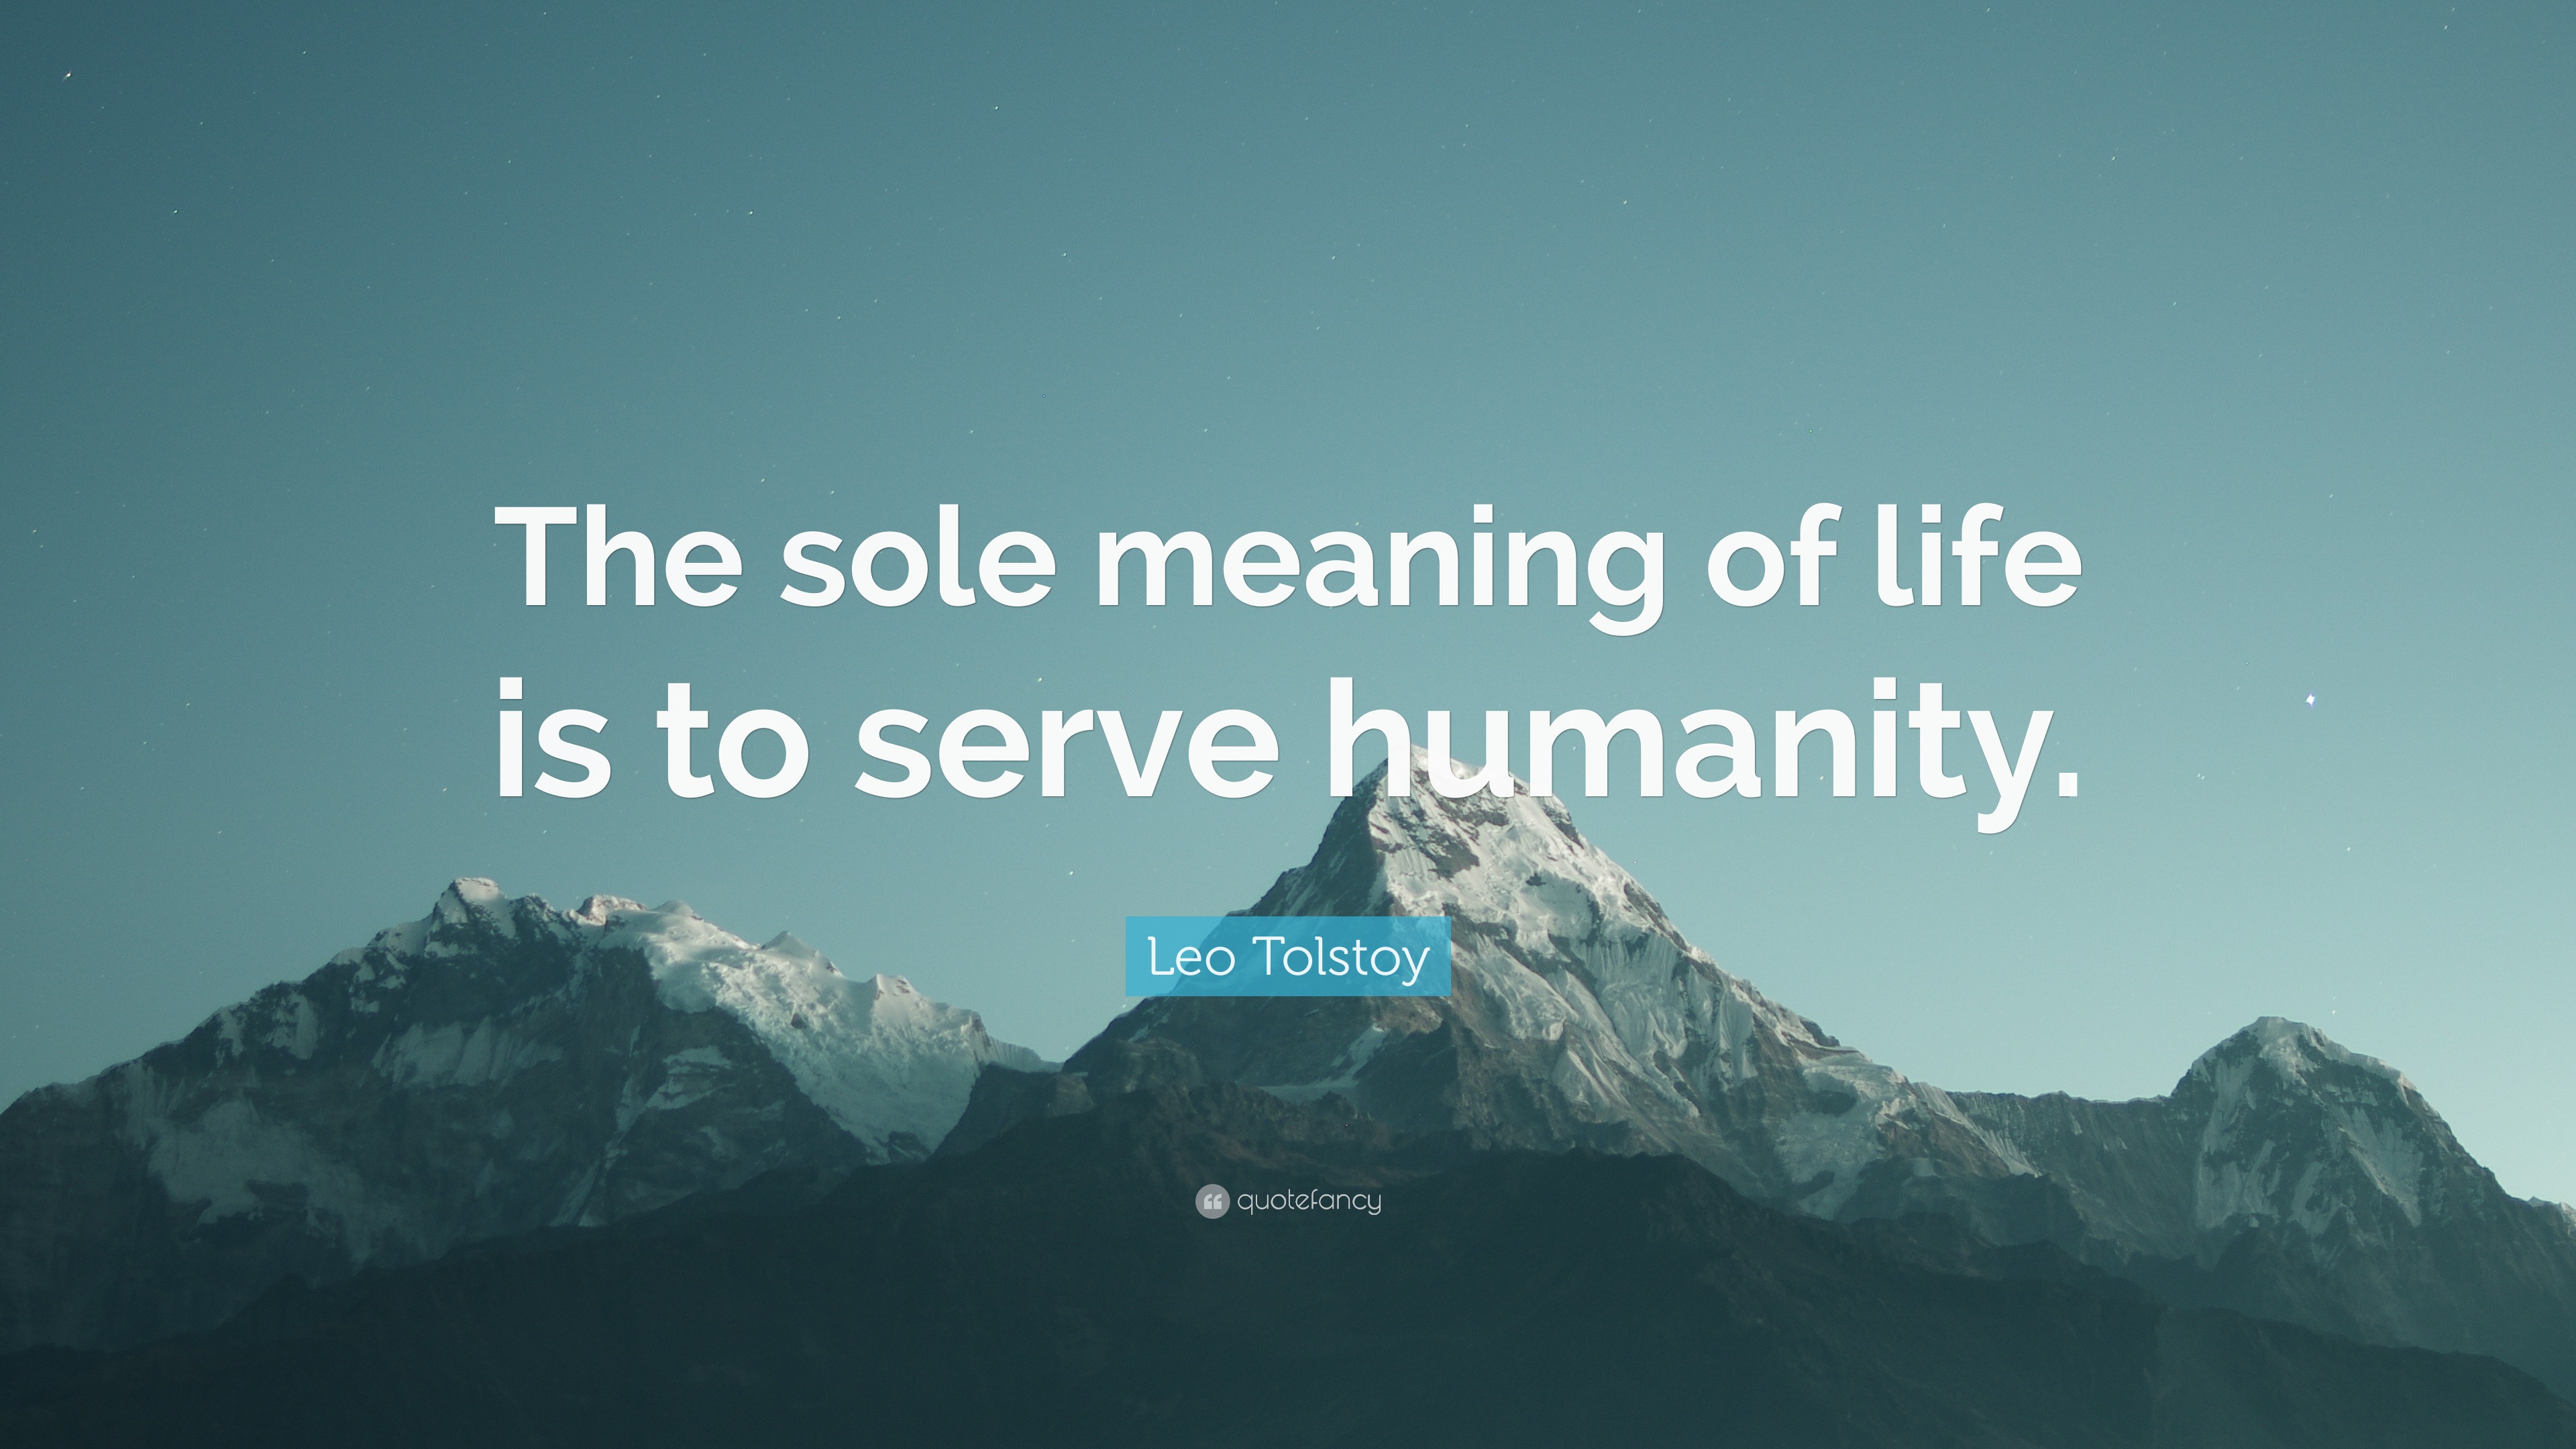 2030425 Leo Tolstoy Quote The sole meaning of life is to serve humanity